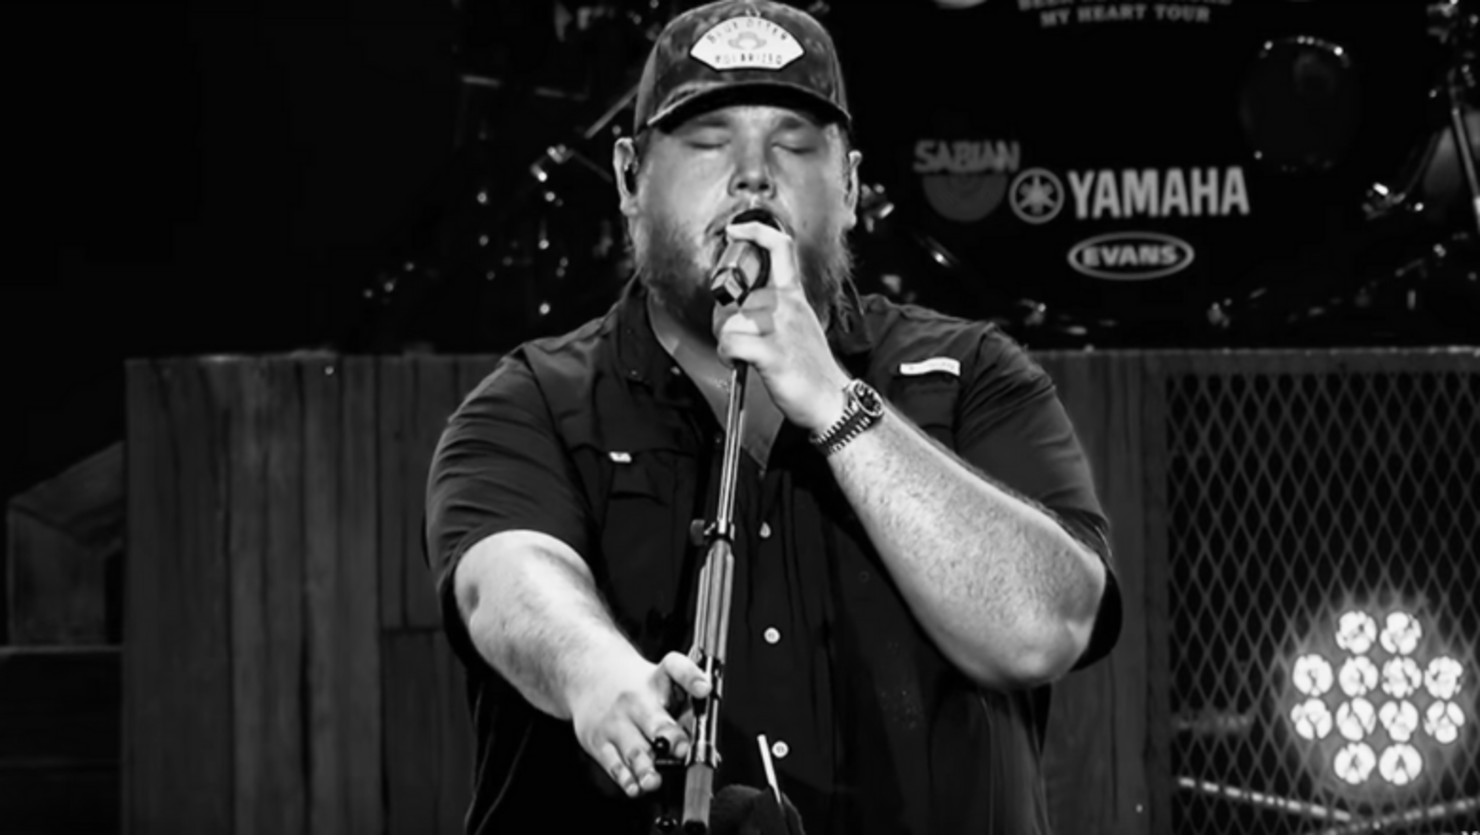 Watch Luke Combs' New Music Video For 'Even Though I'm Leaving'